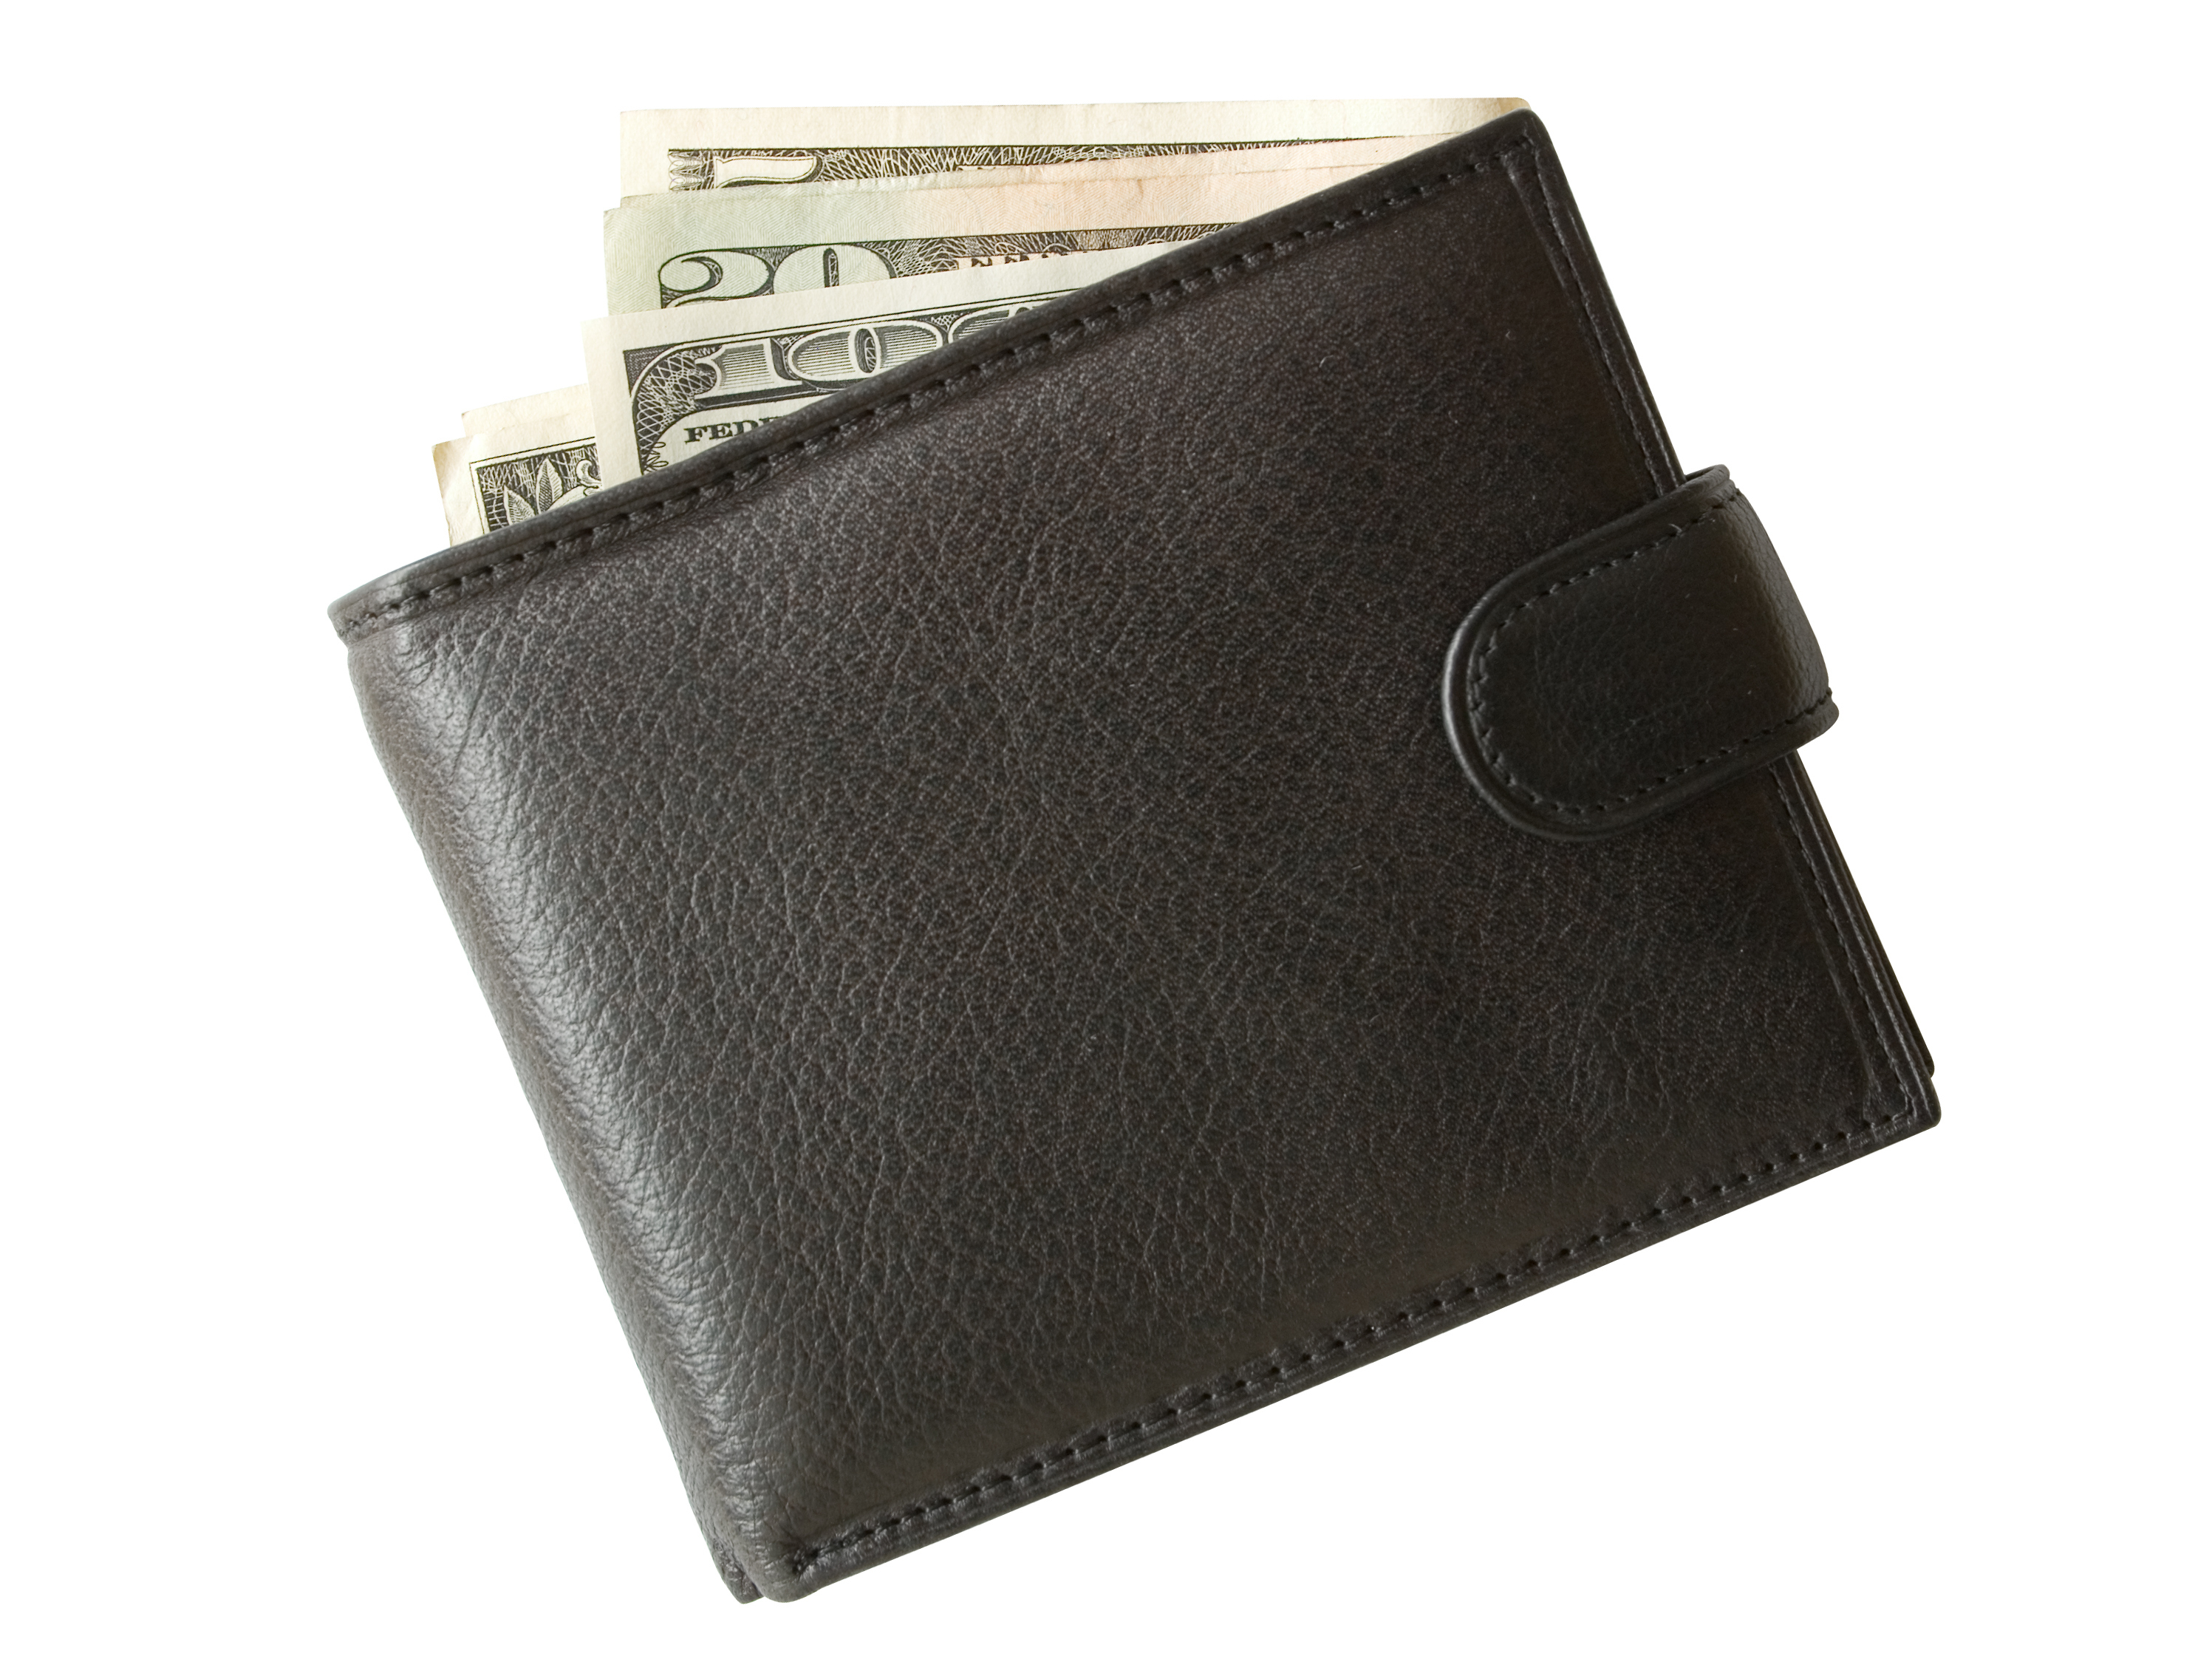 A wallet with cash coming out of it